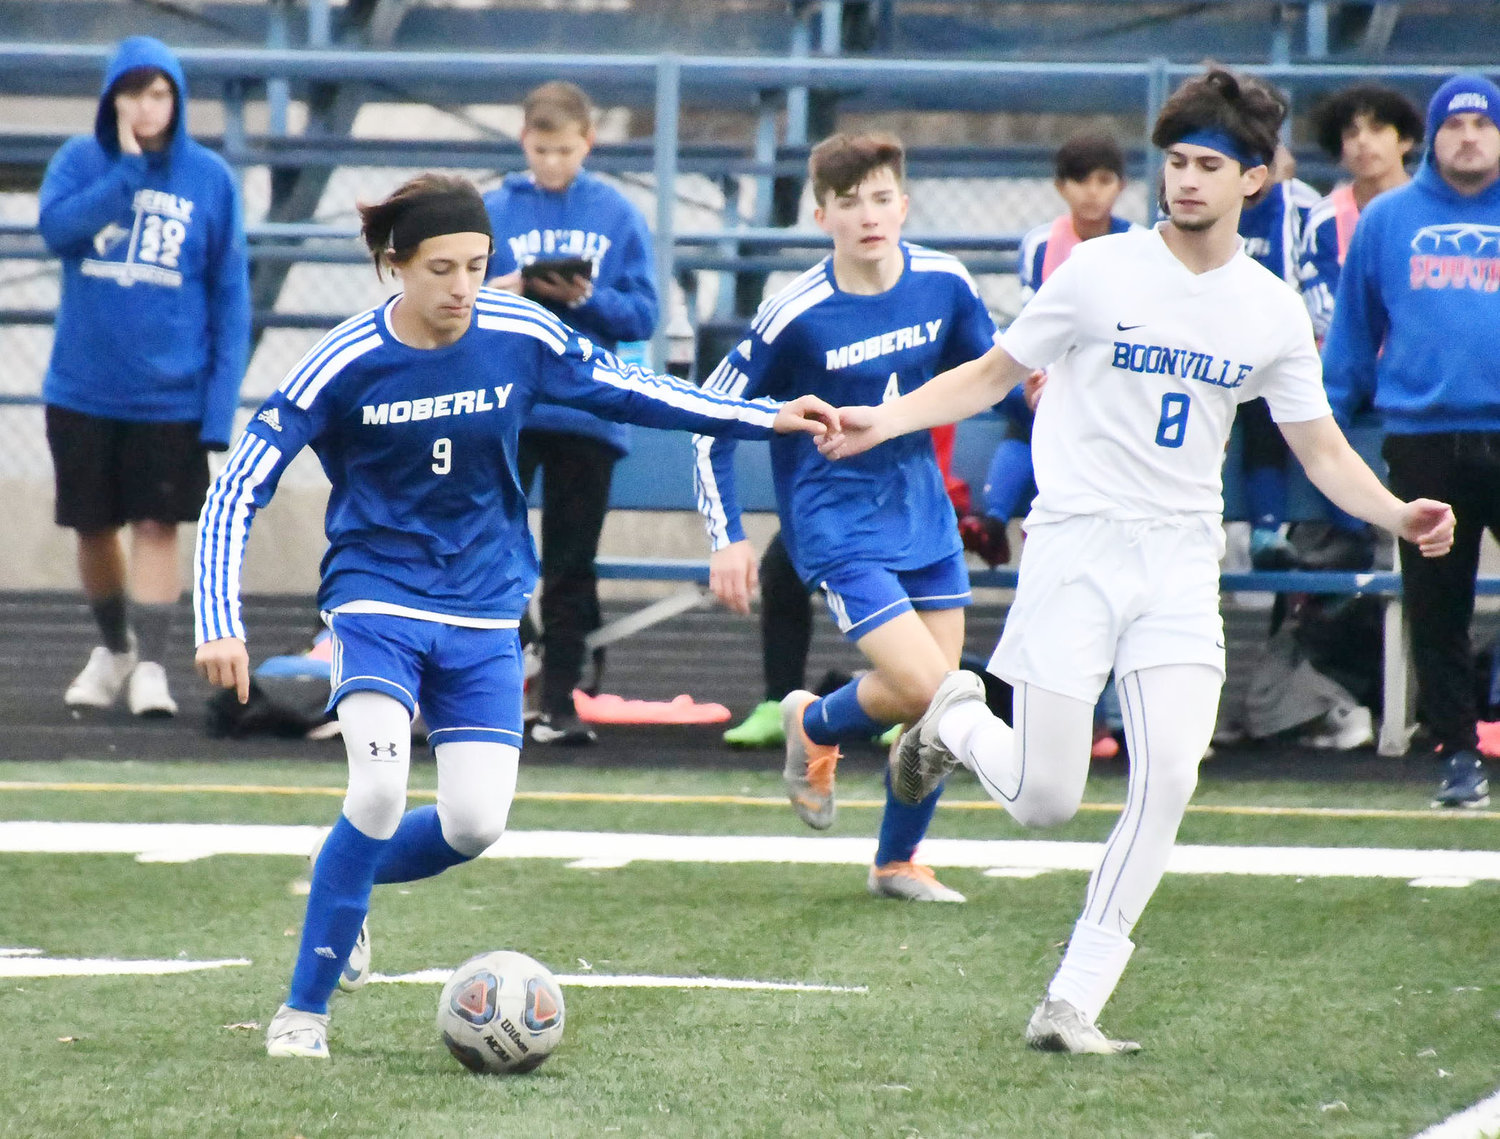 Moberly boys soccer player Lane Longbine dribbles the ball through the midfield during Thursday's game versus Boonville at Dr. Larry K. Noel Spartan Stadium.